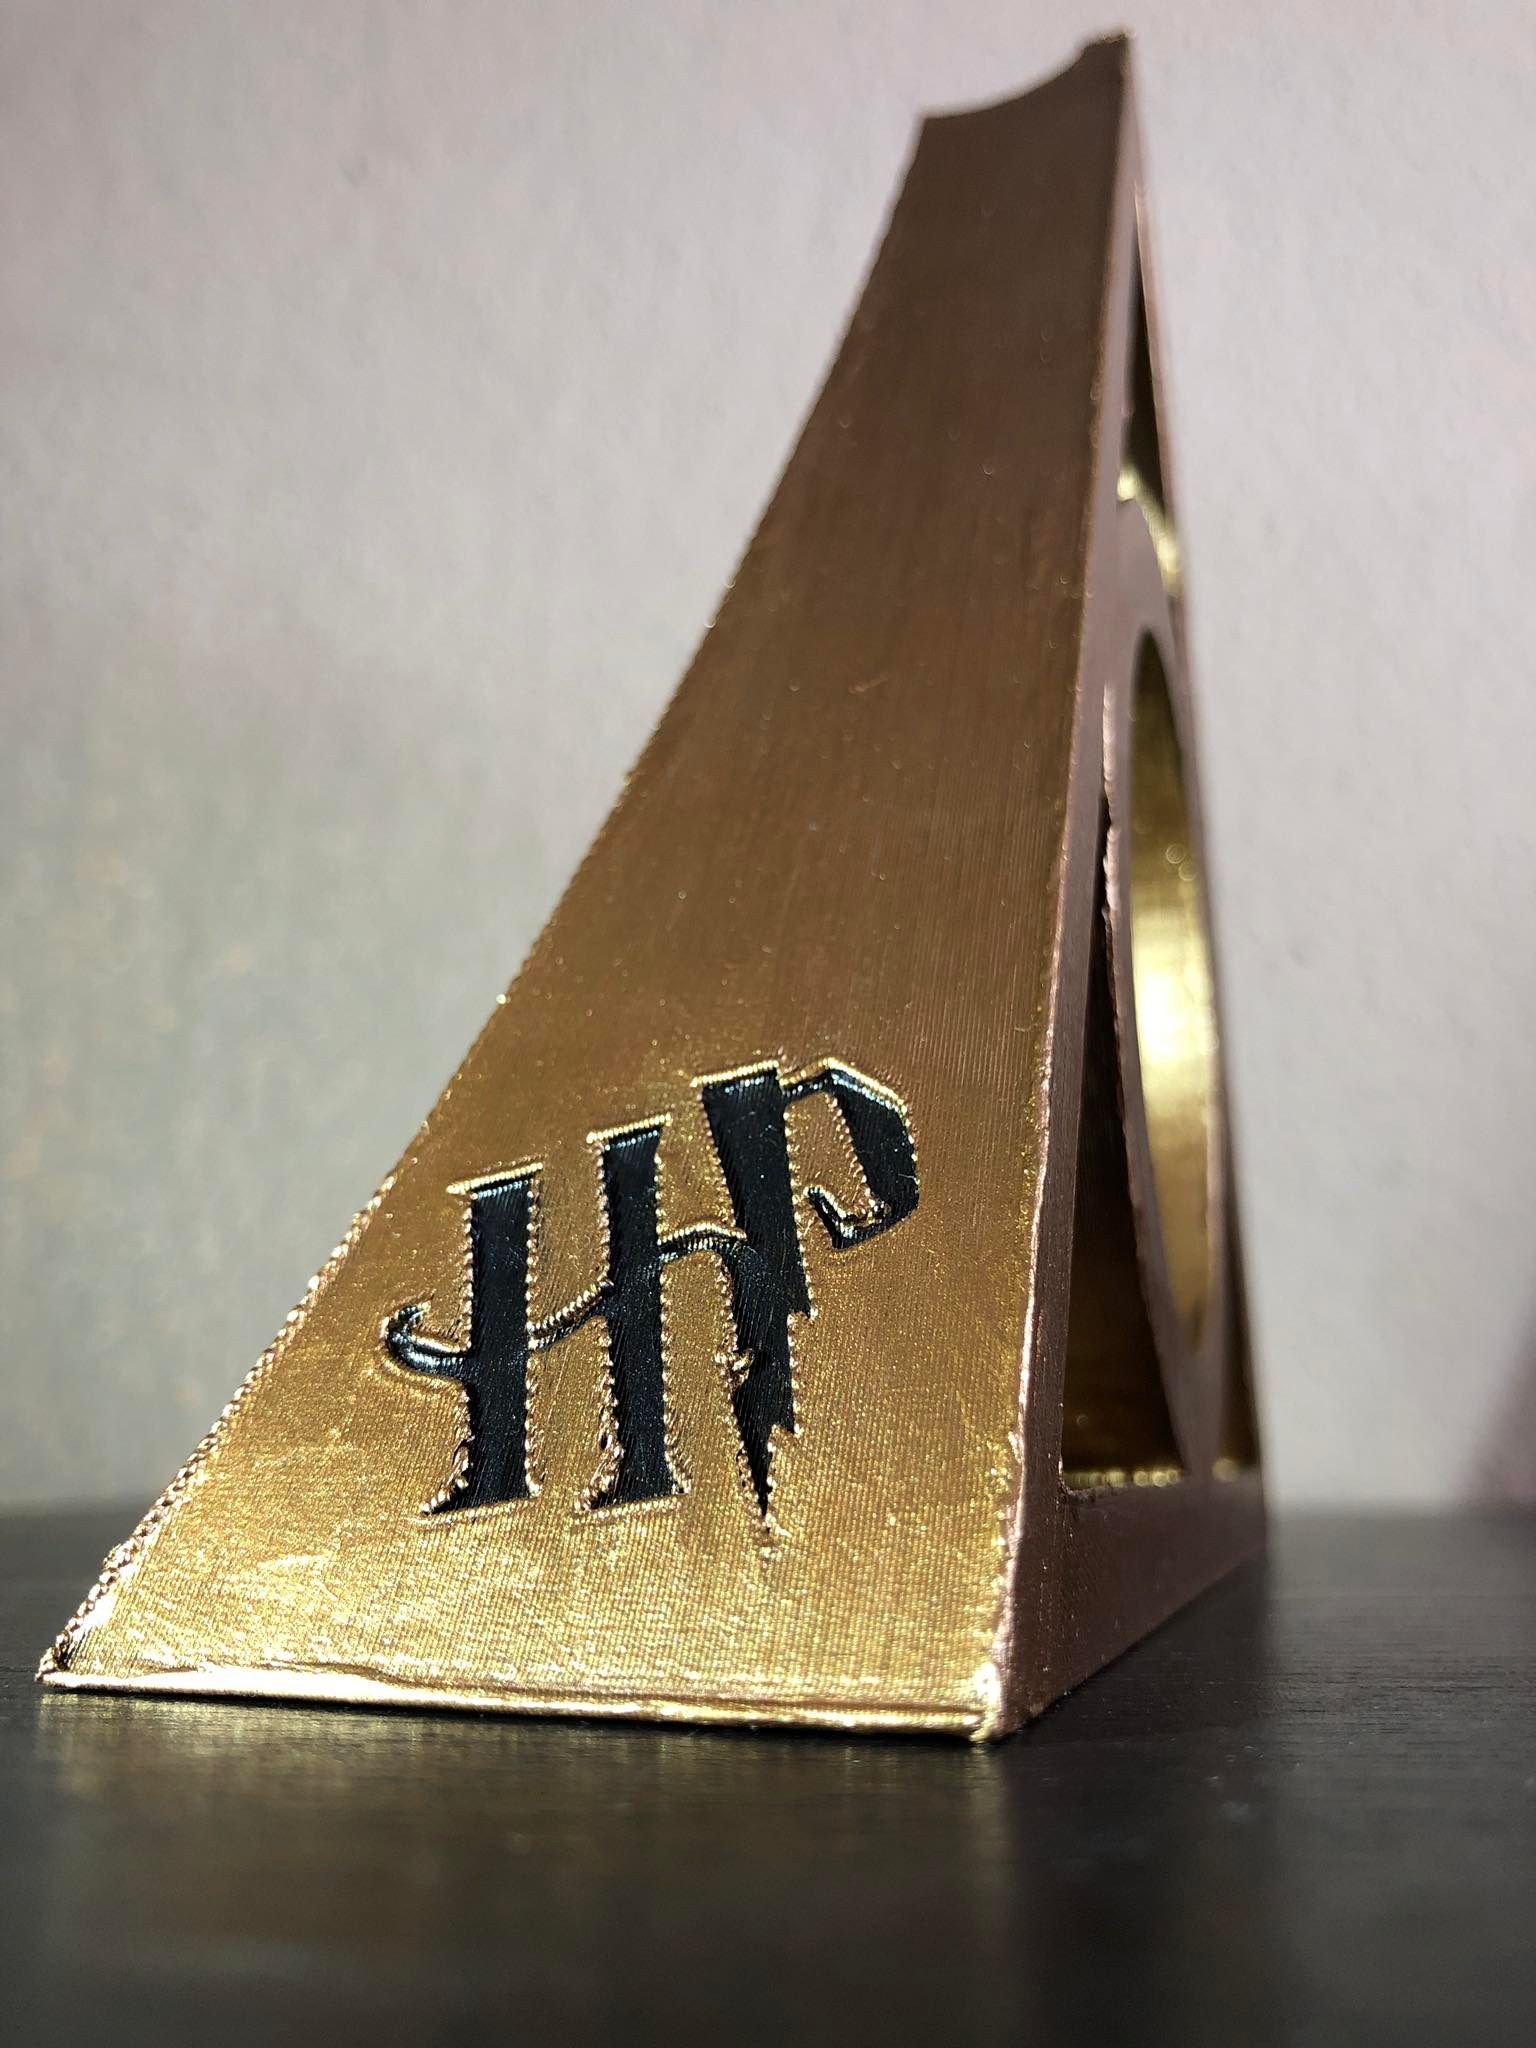 Elder wand stand from harry potter